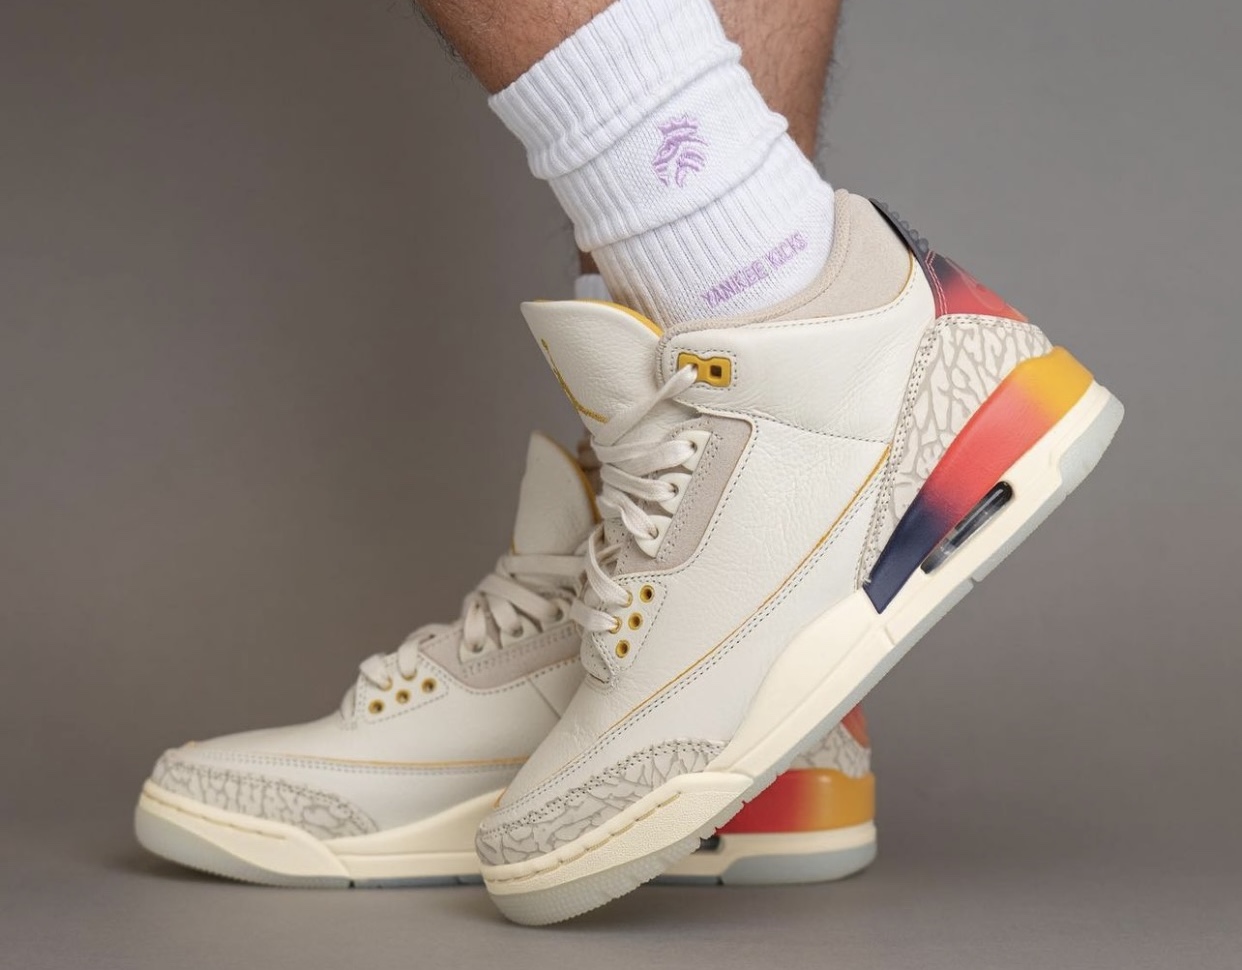 EARLY LOOK!! JORDAN 3 J BALVIN SUNSET DETAILED REVIEW & ON FEET W LACE  SWAPS!! 